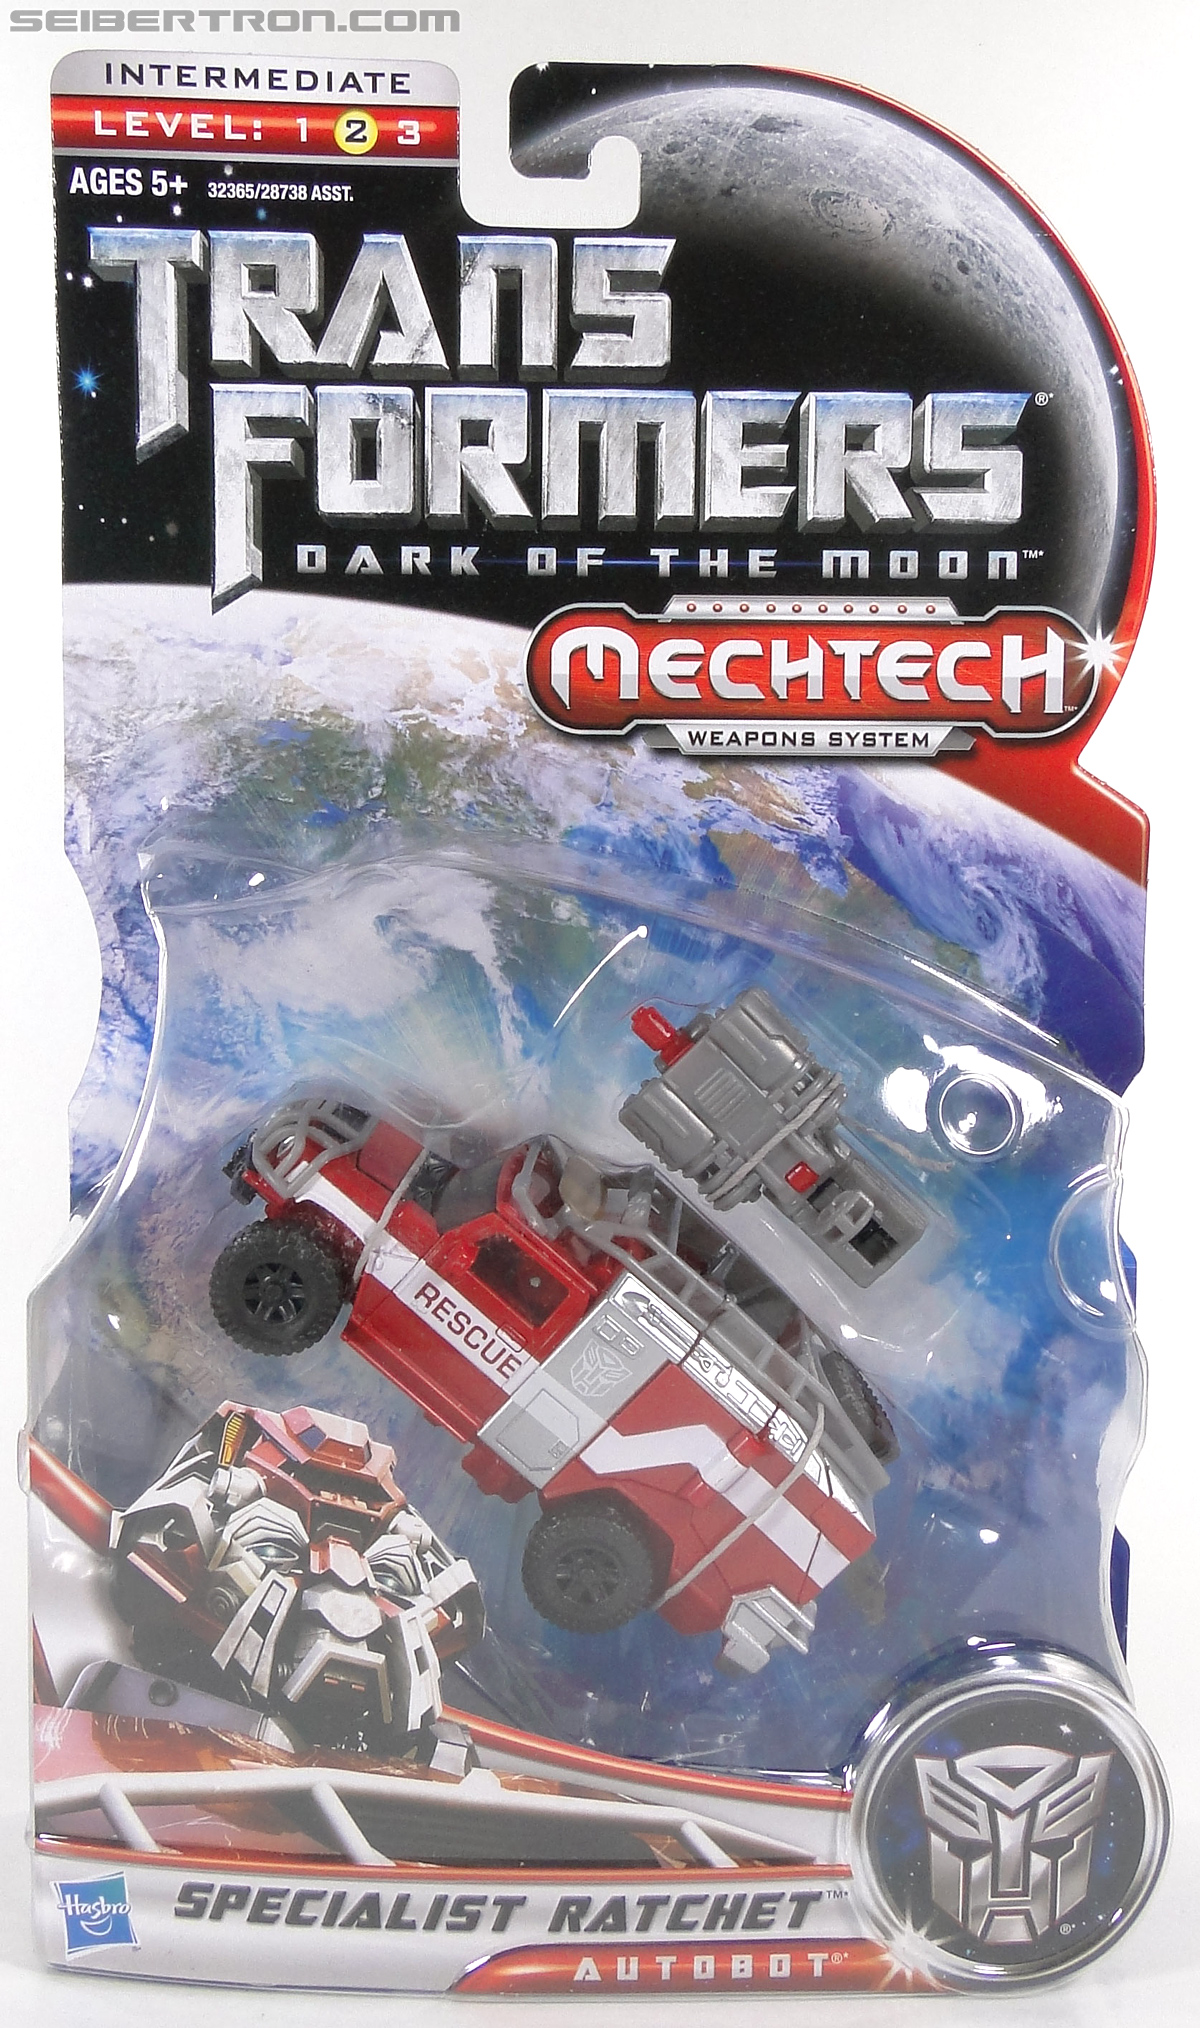 Transformers Dark of the Moon Specialist Ratchet (Image #1 of 118)